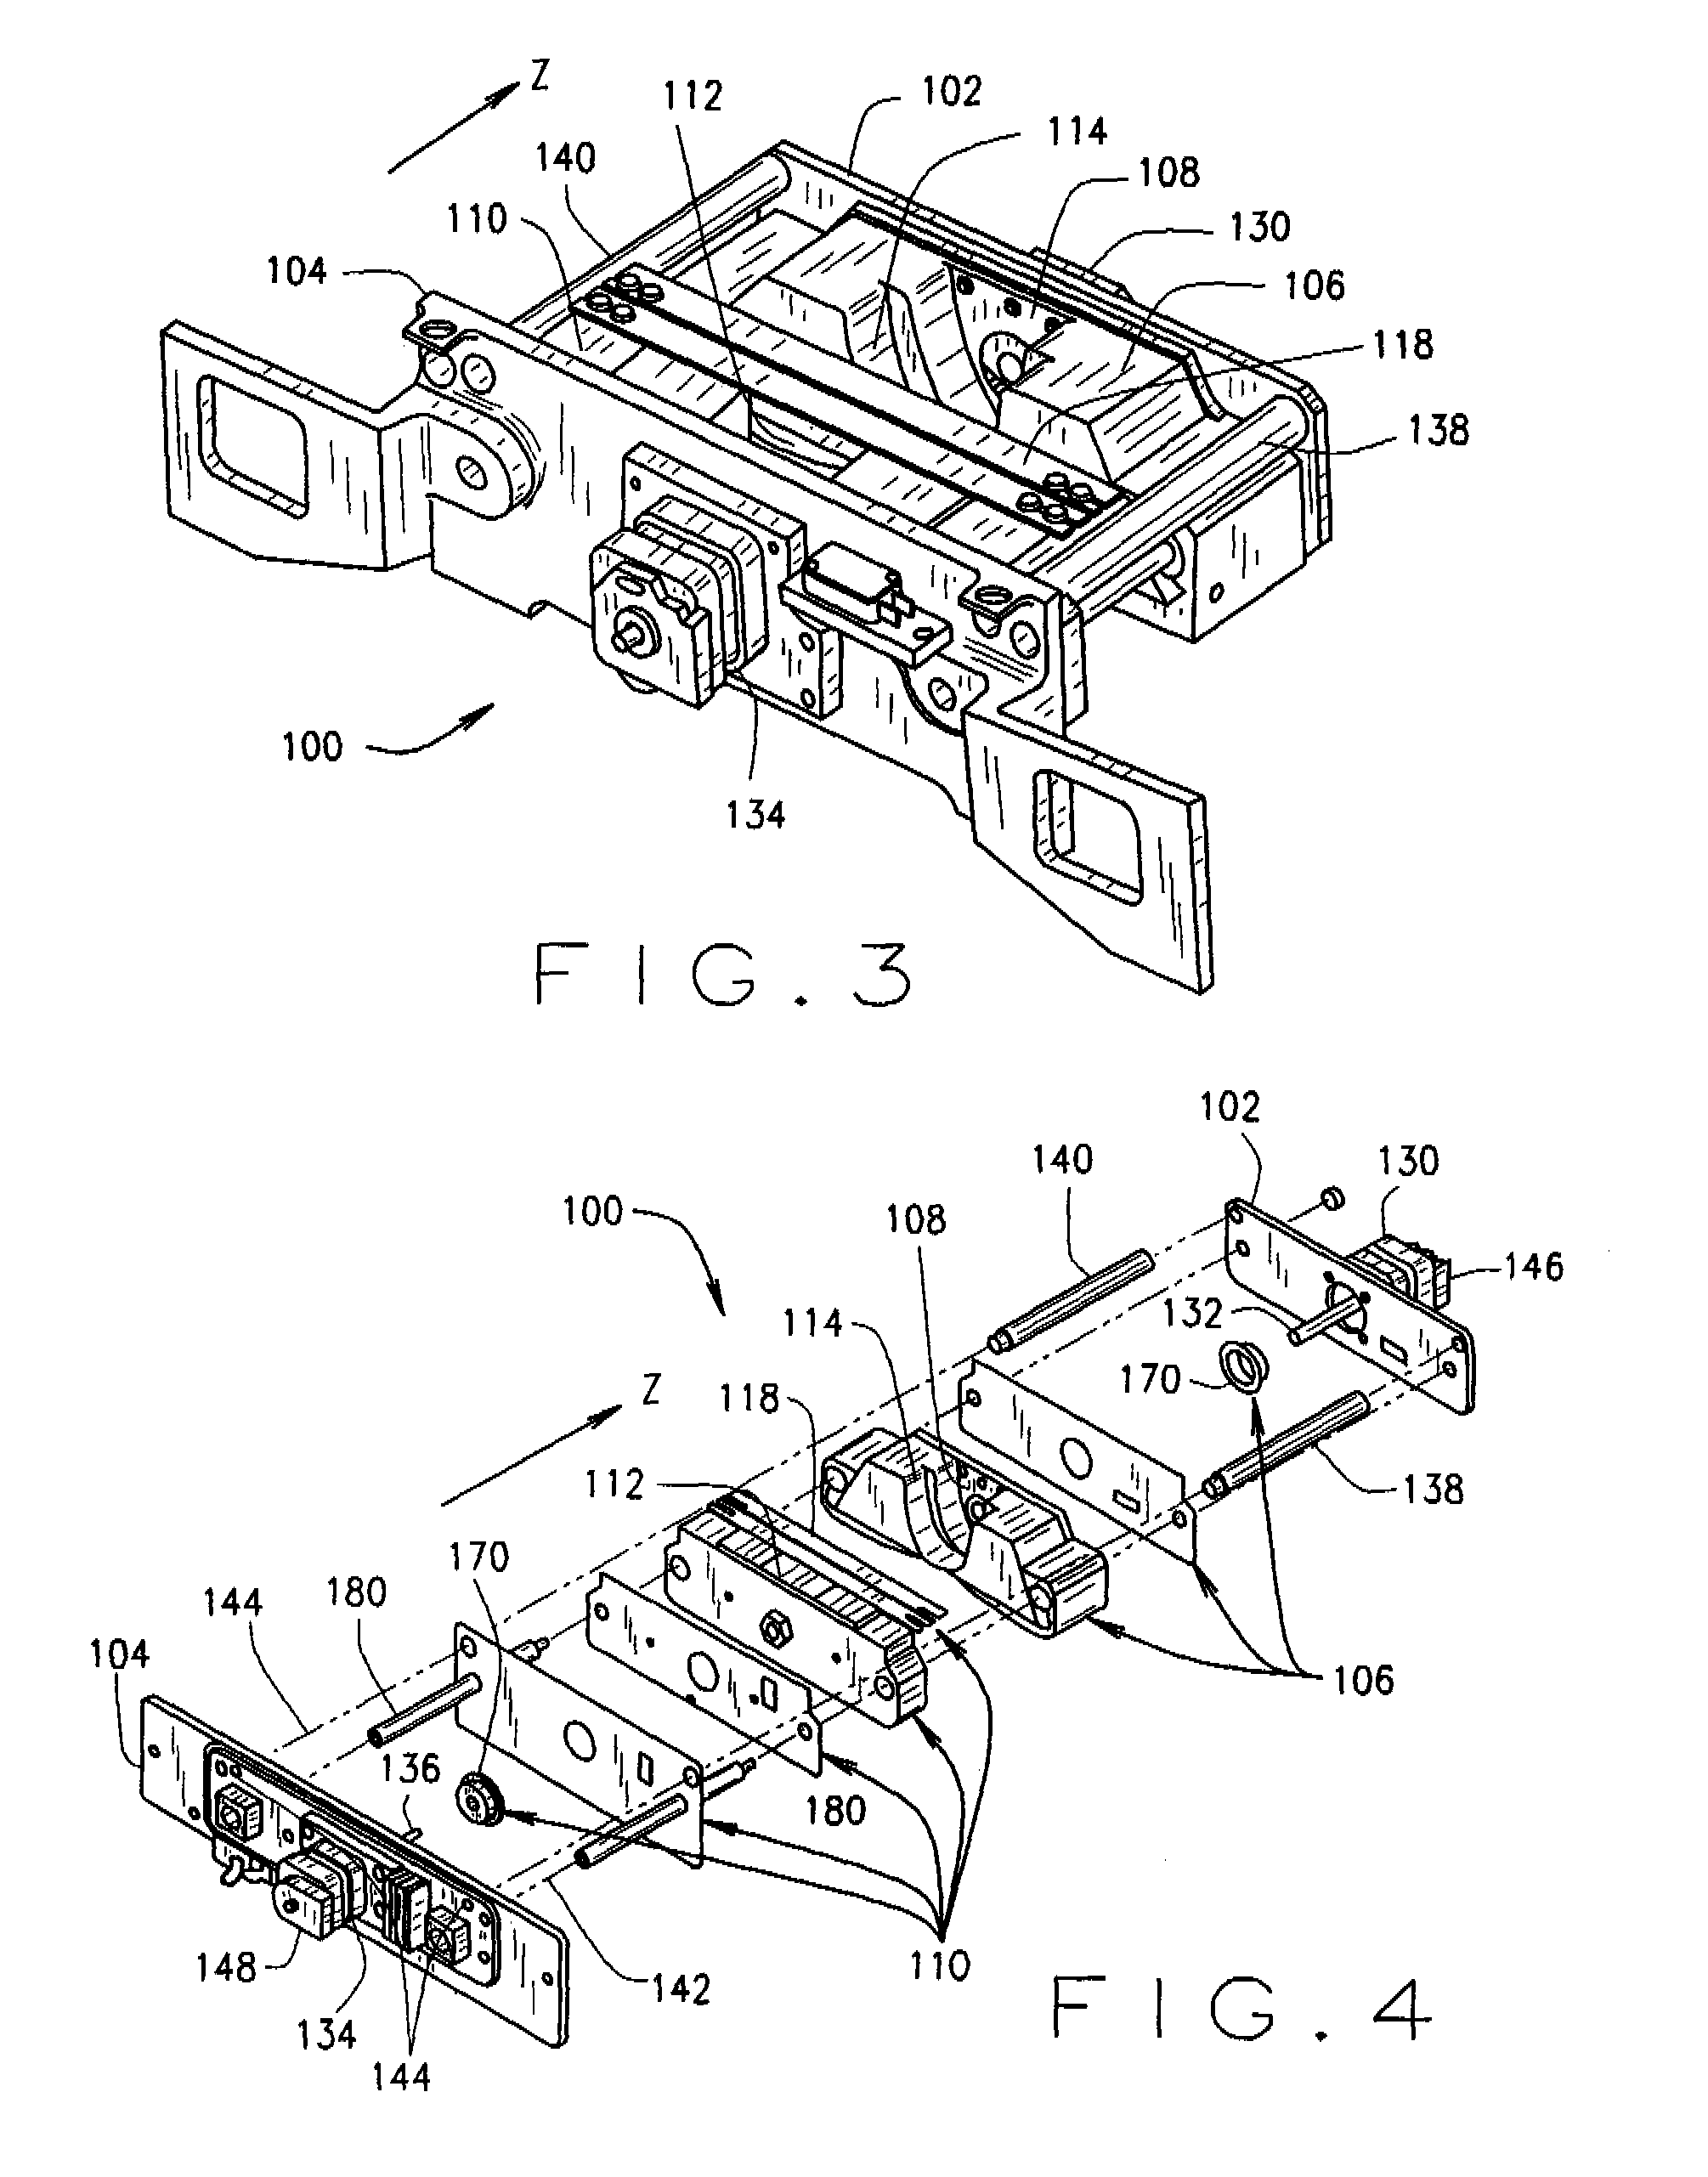 Methods and apparatus for filtering a radiation beam and CT imaging systems using same